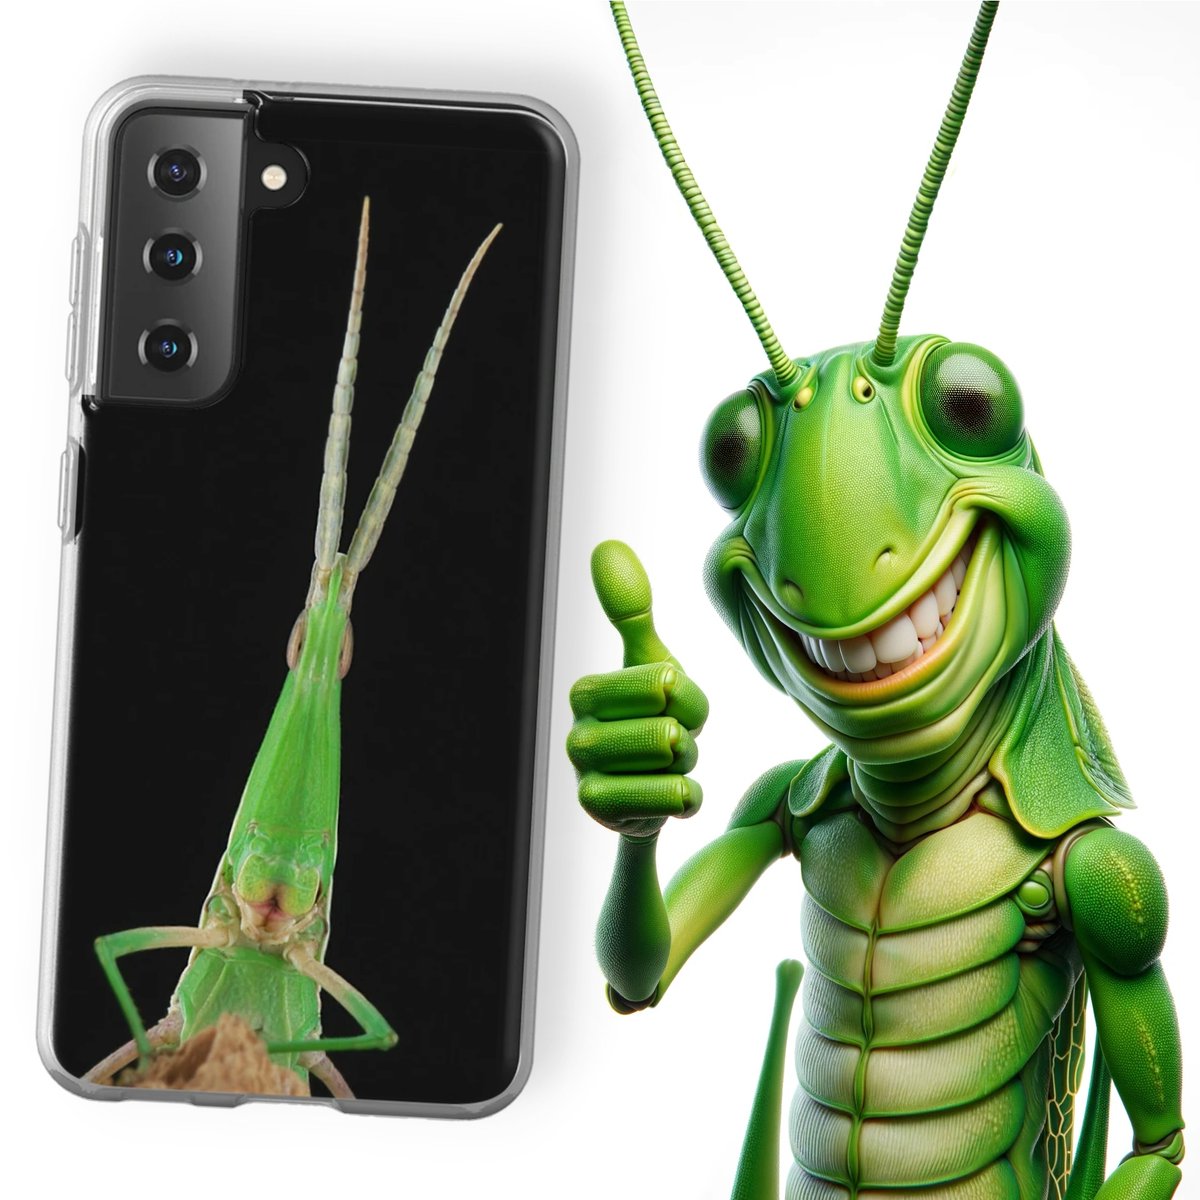 SINOBUG entomological phone cases - for iPhone & Samsung models with slim, tough, and soft case options on #REDBUBBLE... PLUS LOTS MORE, ALL 25% off!! Grasshopper (Acrida chinensis, Acrididae) Pu'er, Yunnan, China redbubble.com/shop/ap/152281… Full store: itchydogimages.redbubble.com